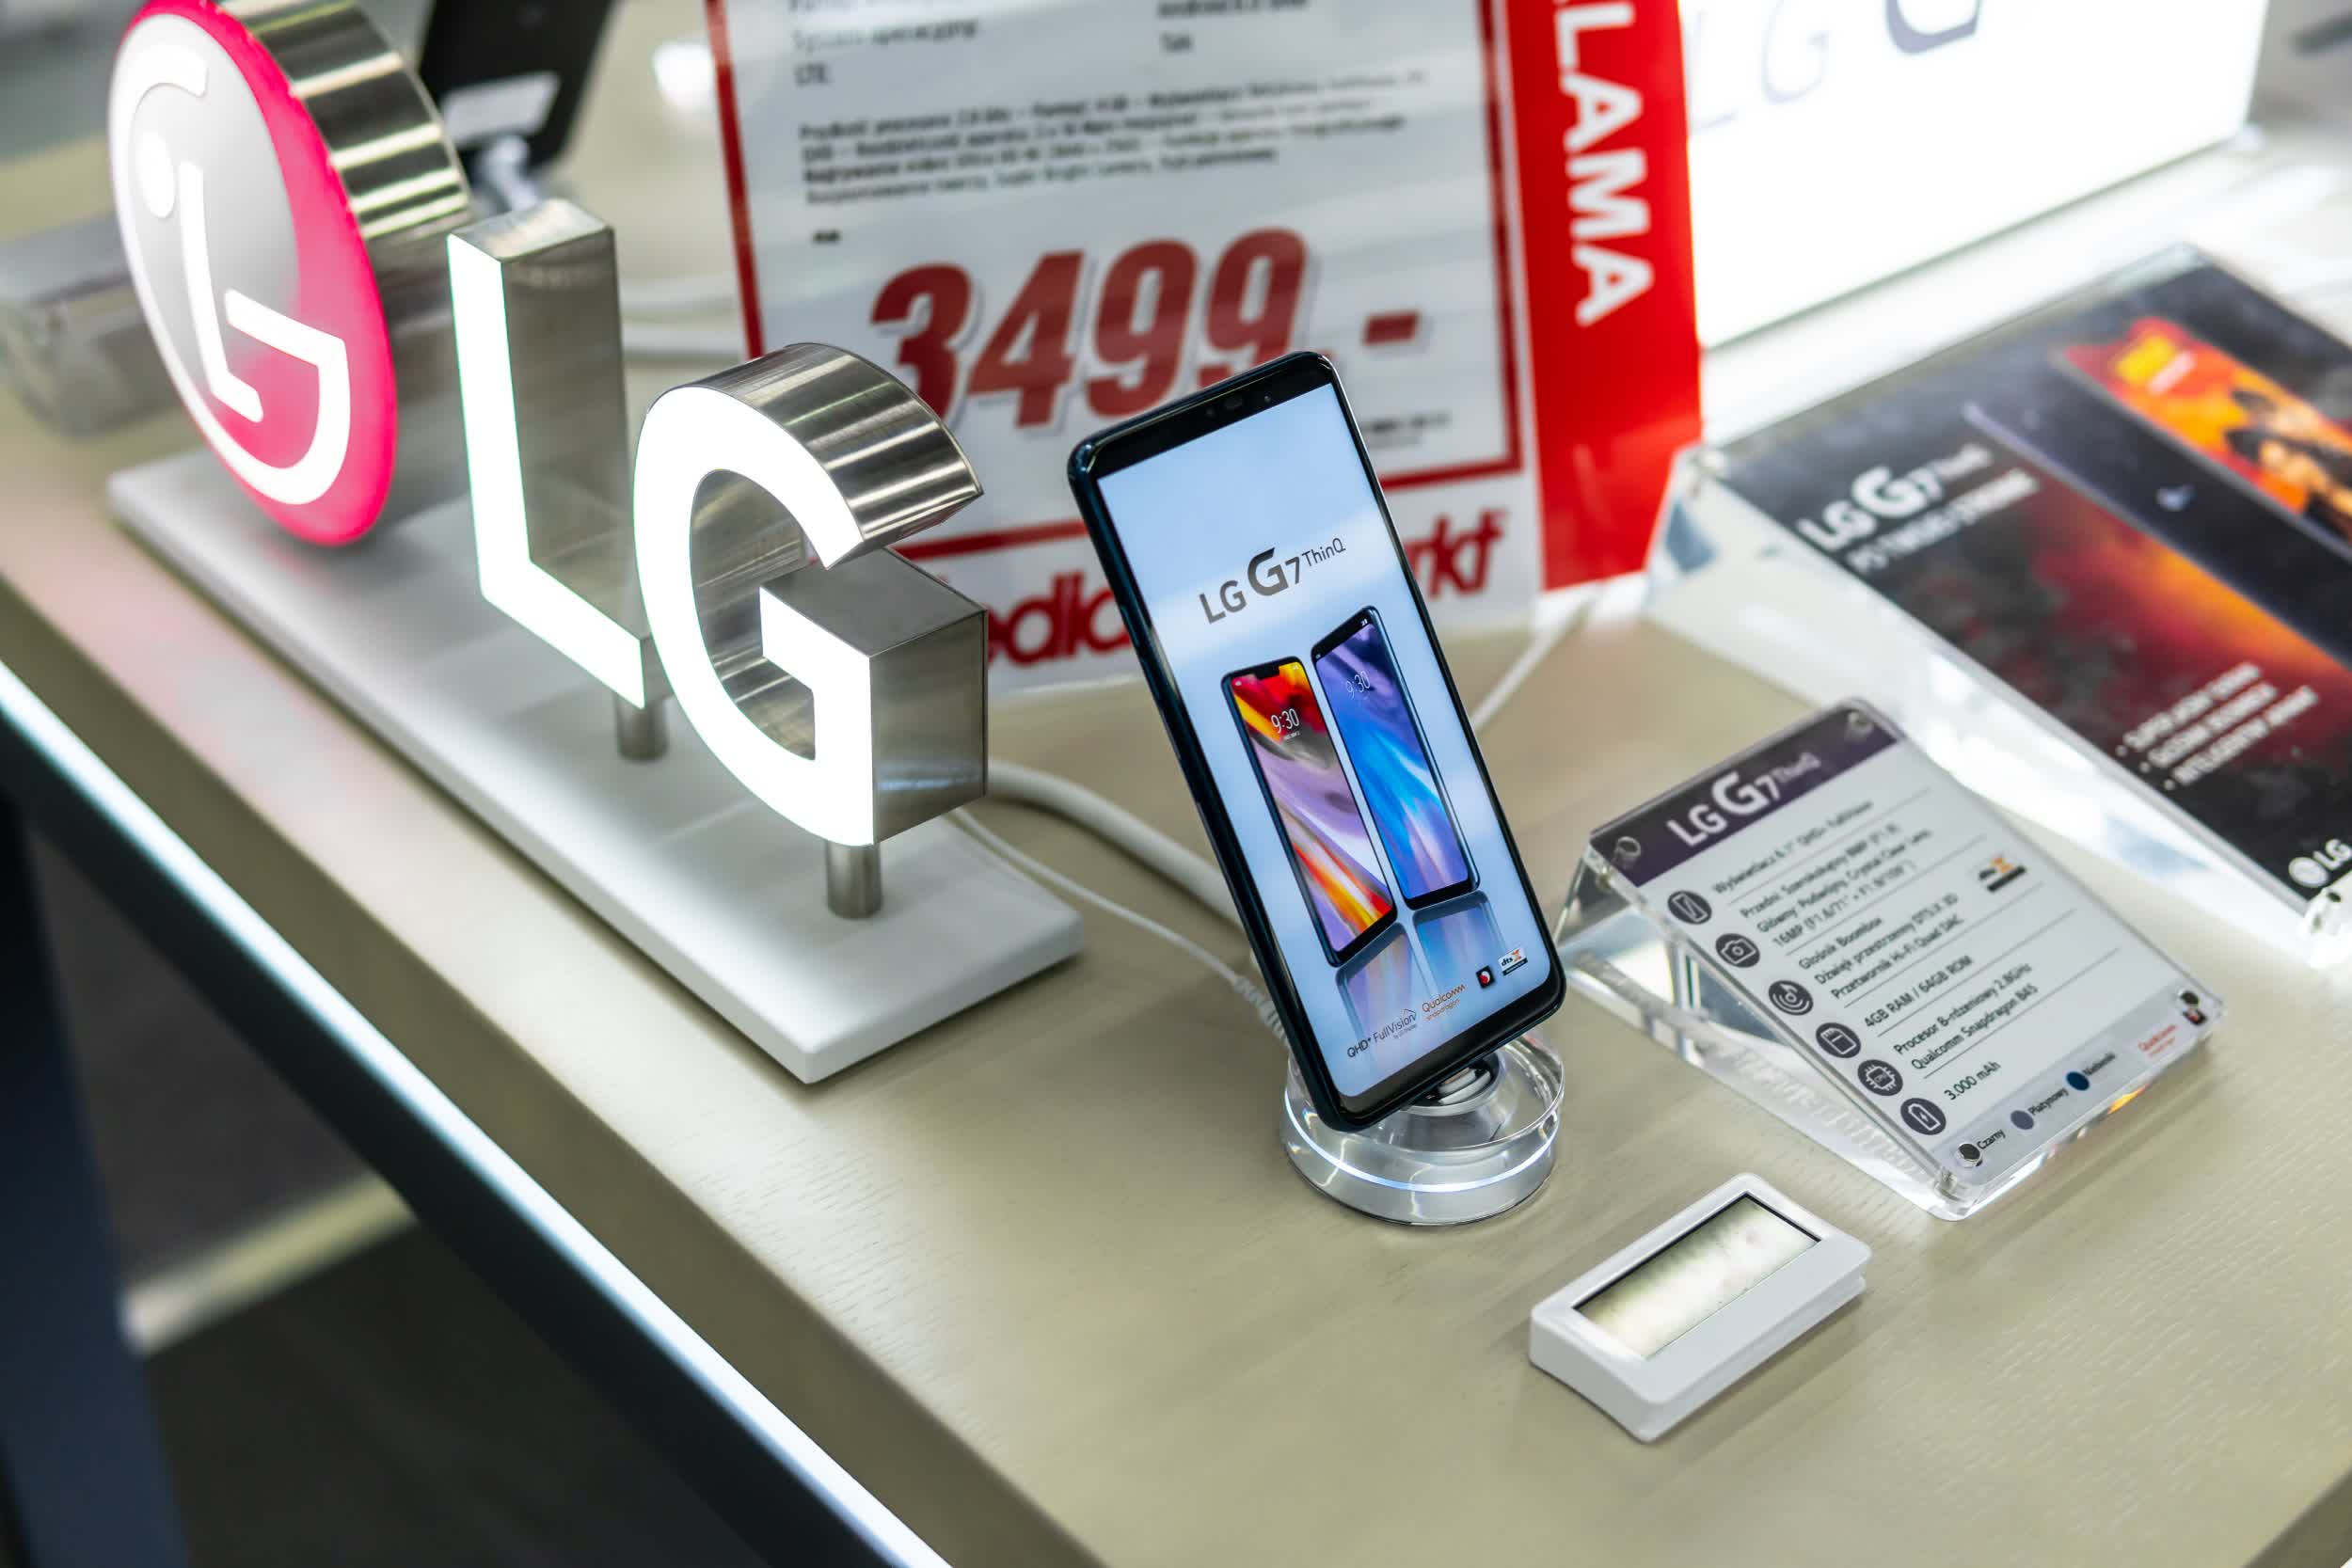 LG outsources loss-making mobile phone business to focus on high-end devices